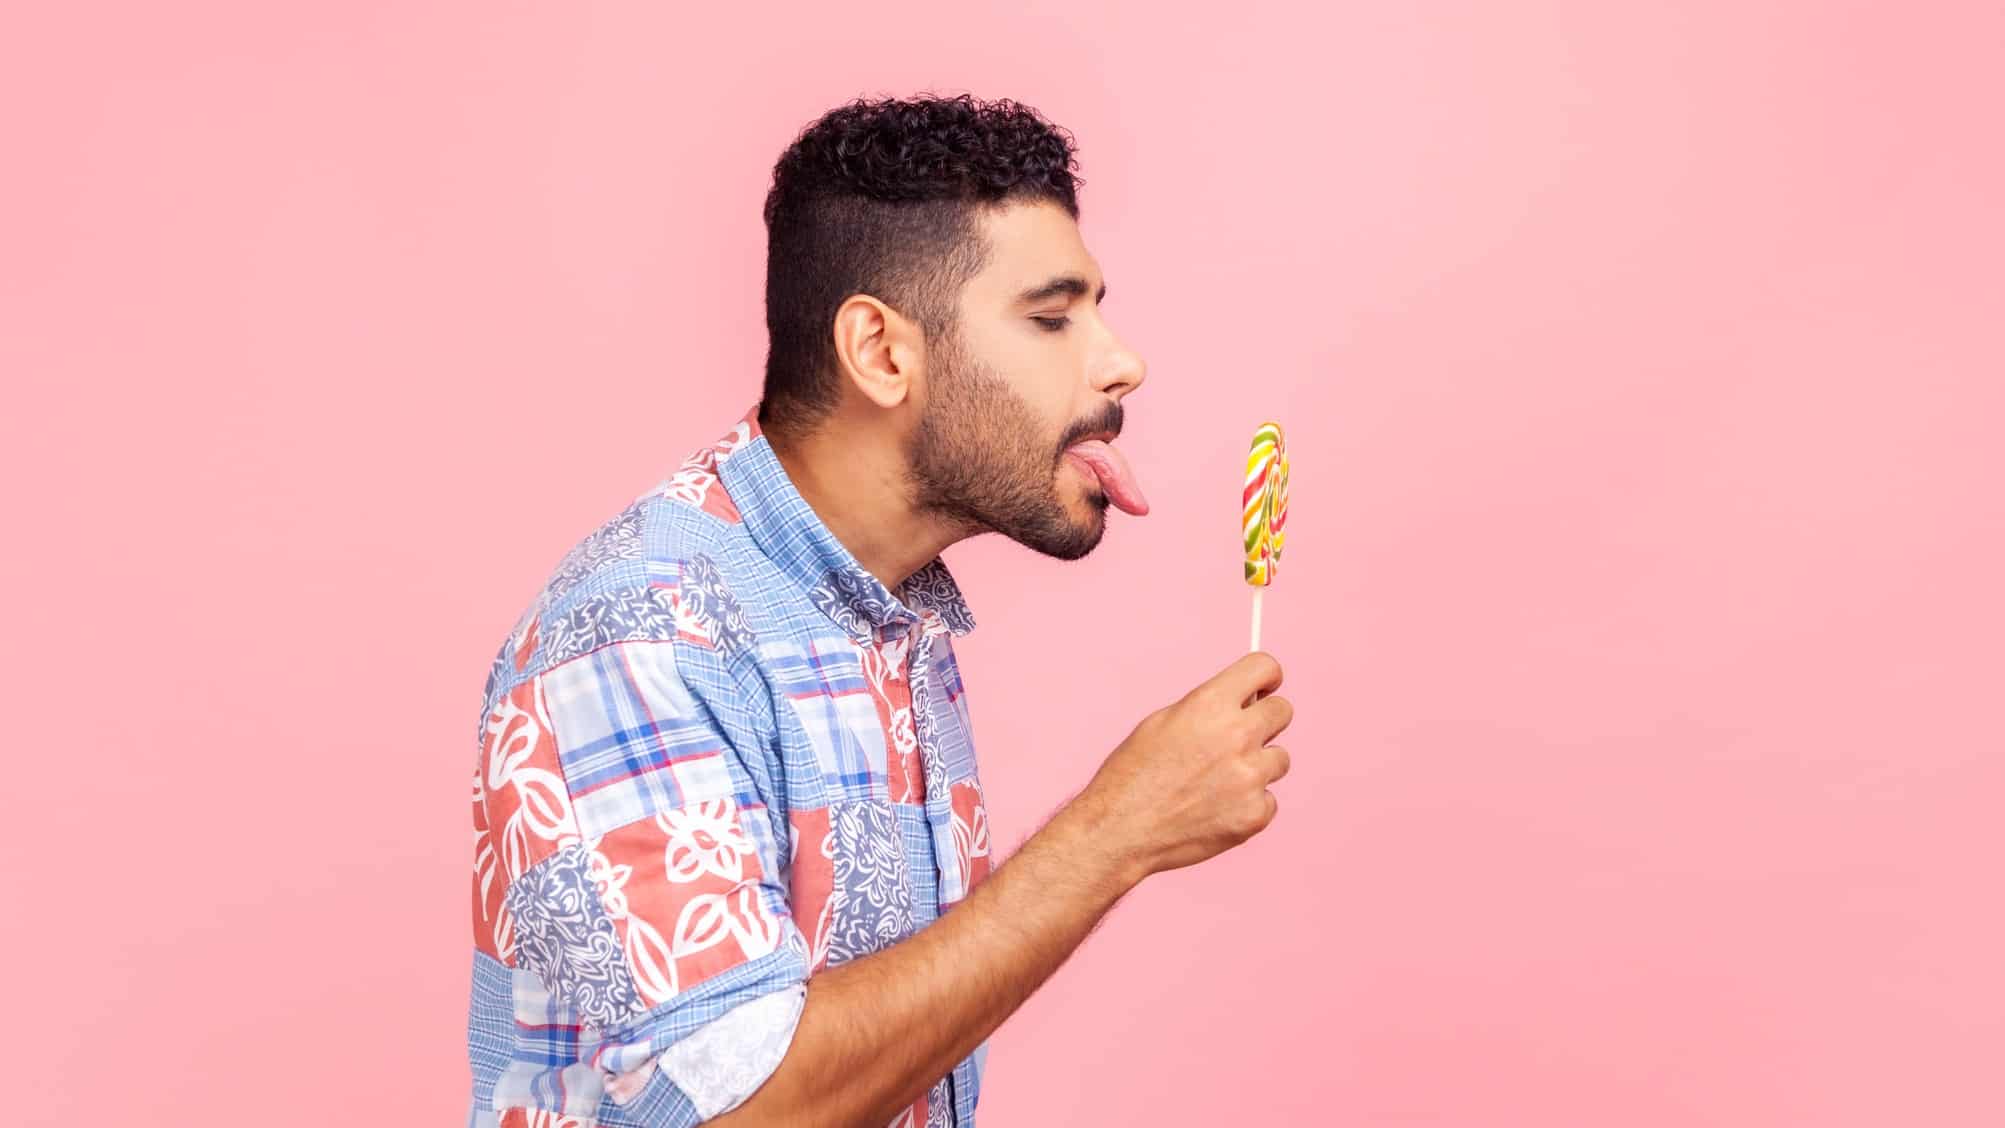 A man in a colourful party shirt sticks his tongue out really far to lick a lollipop.